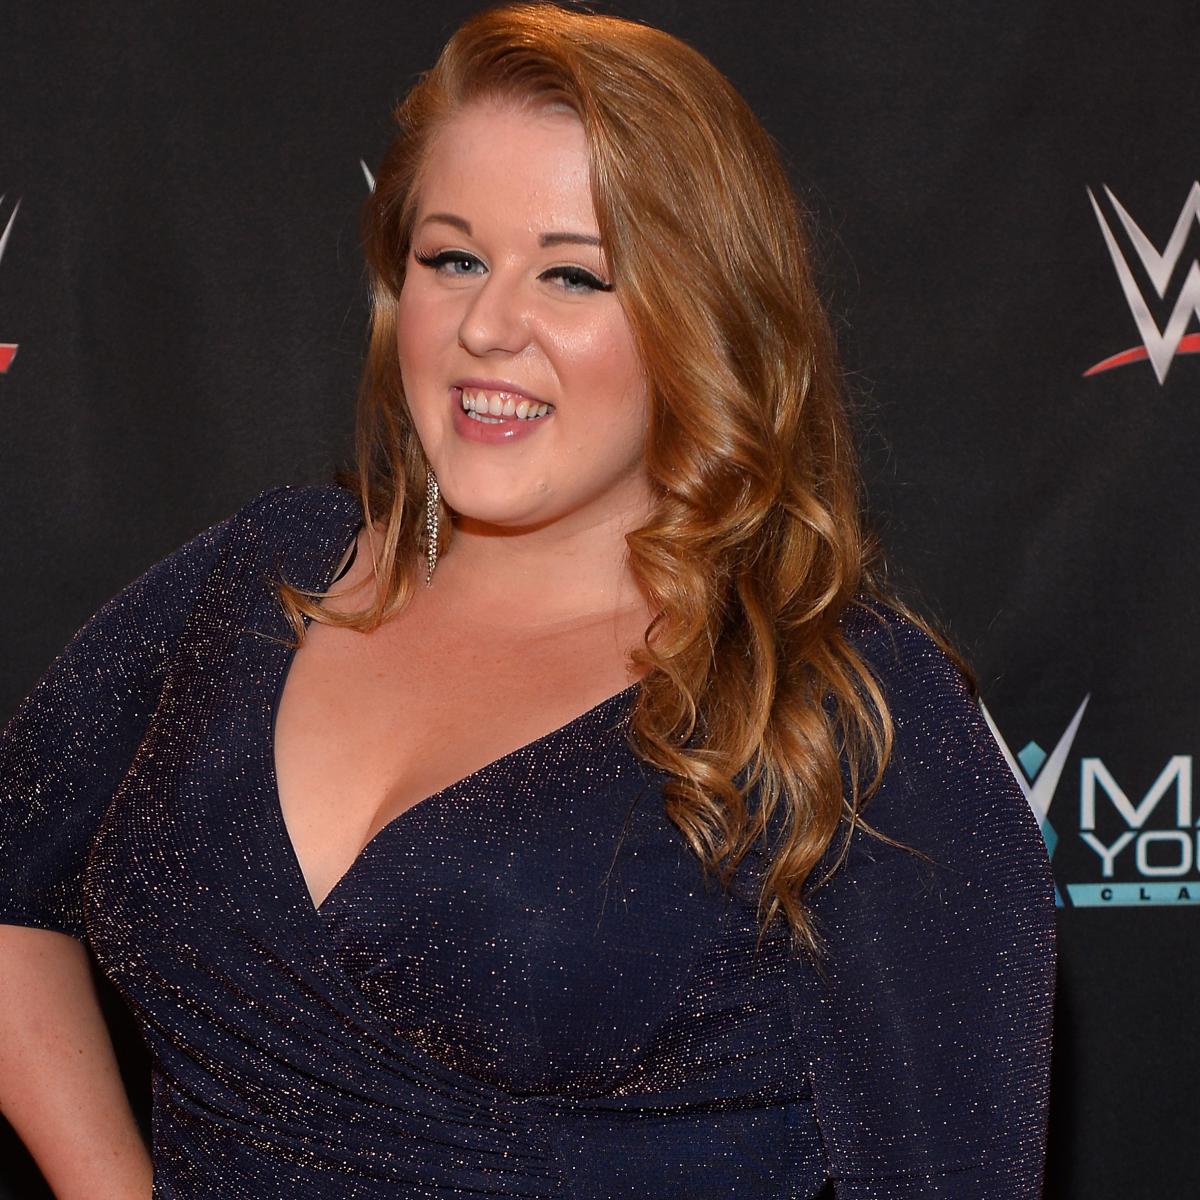 Wwe Nxt Uk Star Piper Niven Reveals Bells Palsy Diagnosis On Twitter